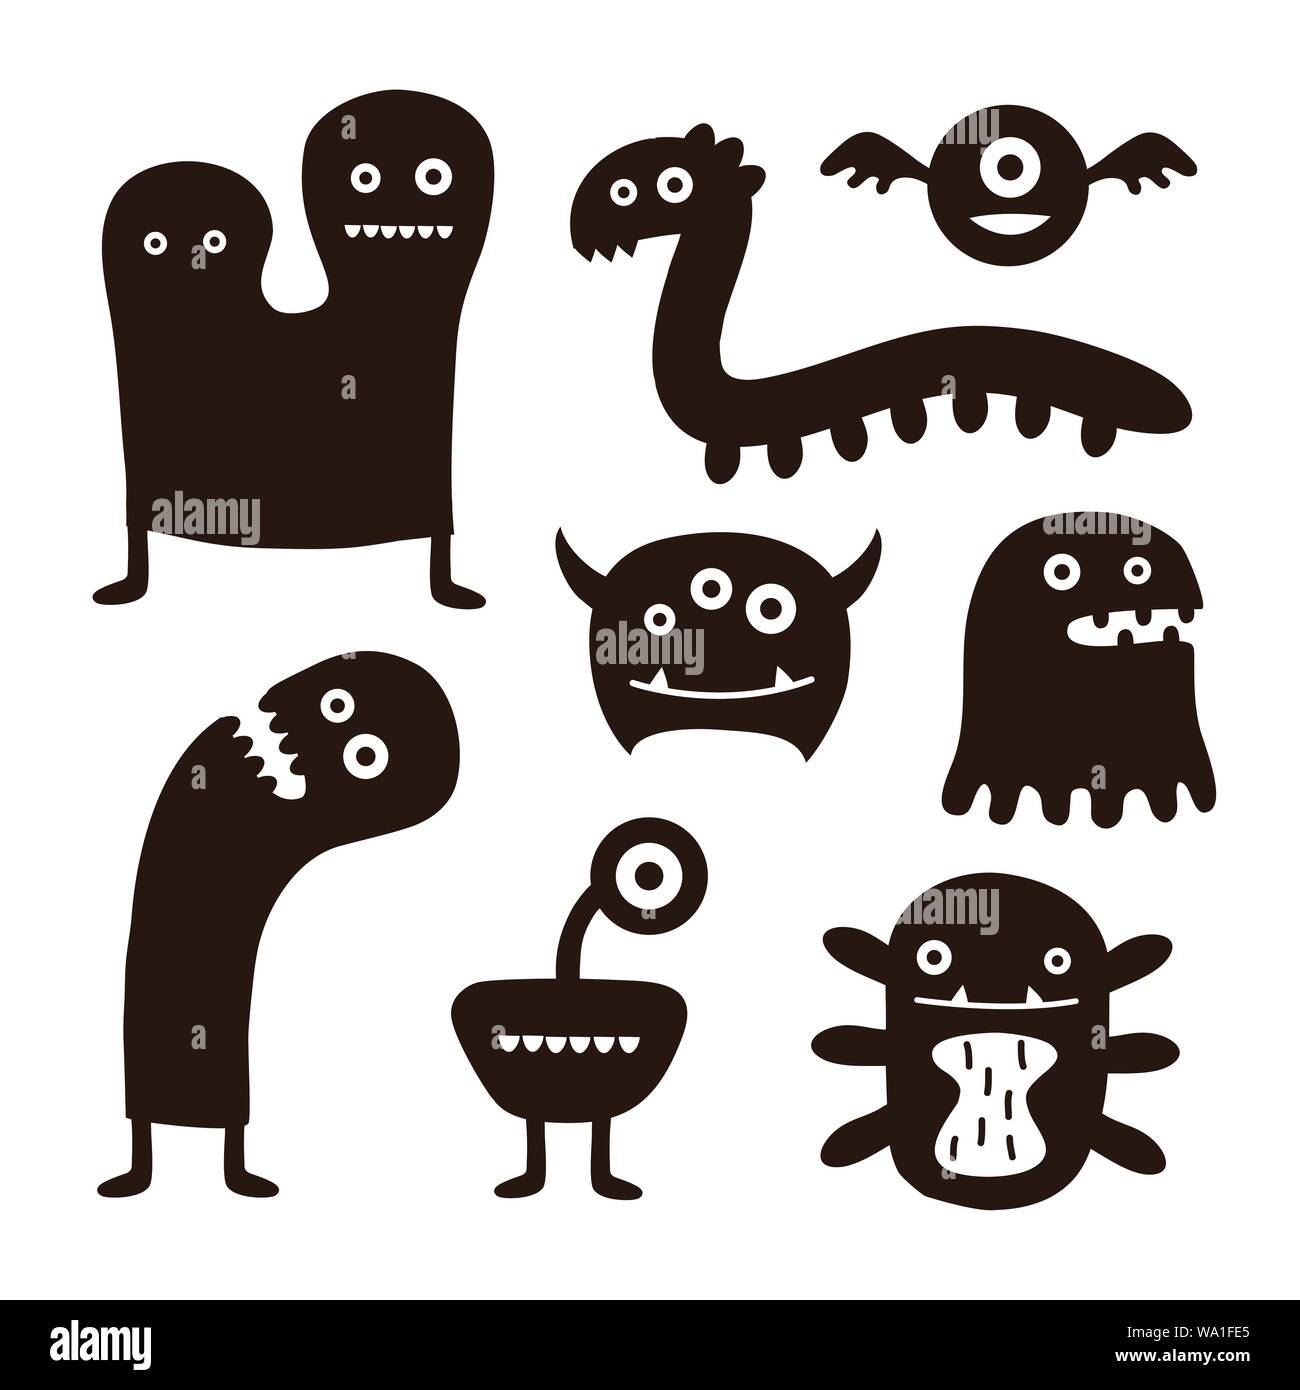 Cool monsters icons collection. Isolaet object. Vector illustration Stock Vector